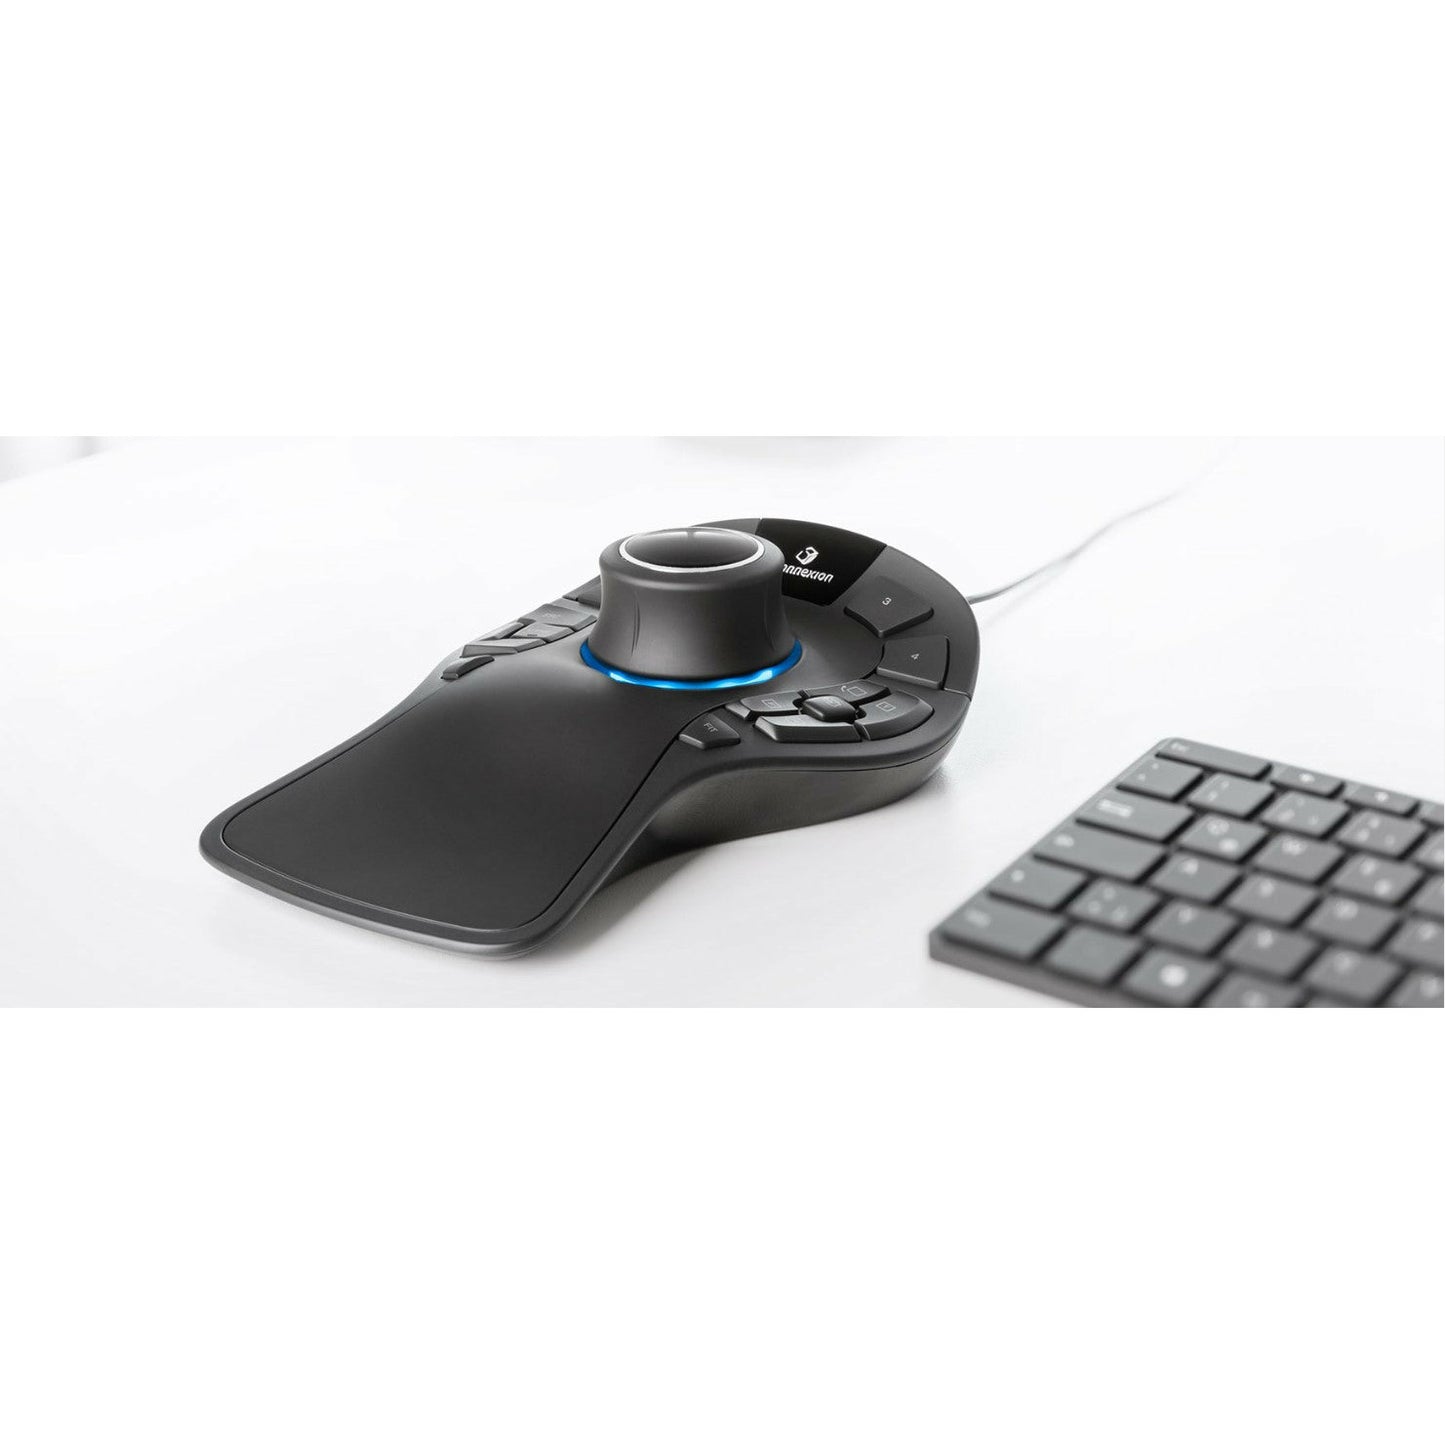 3DConnexion 3DX-700040 SpaceMouse Pro Professional 3D Wired Mouse with 15 Functional Keys, 4 Keyboard Modifiers and Rotation Toggle Key for Engineers, Designers and Architects